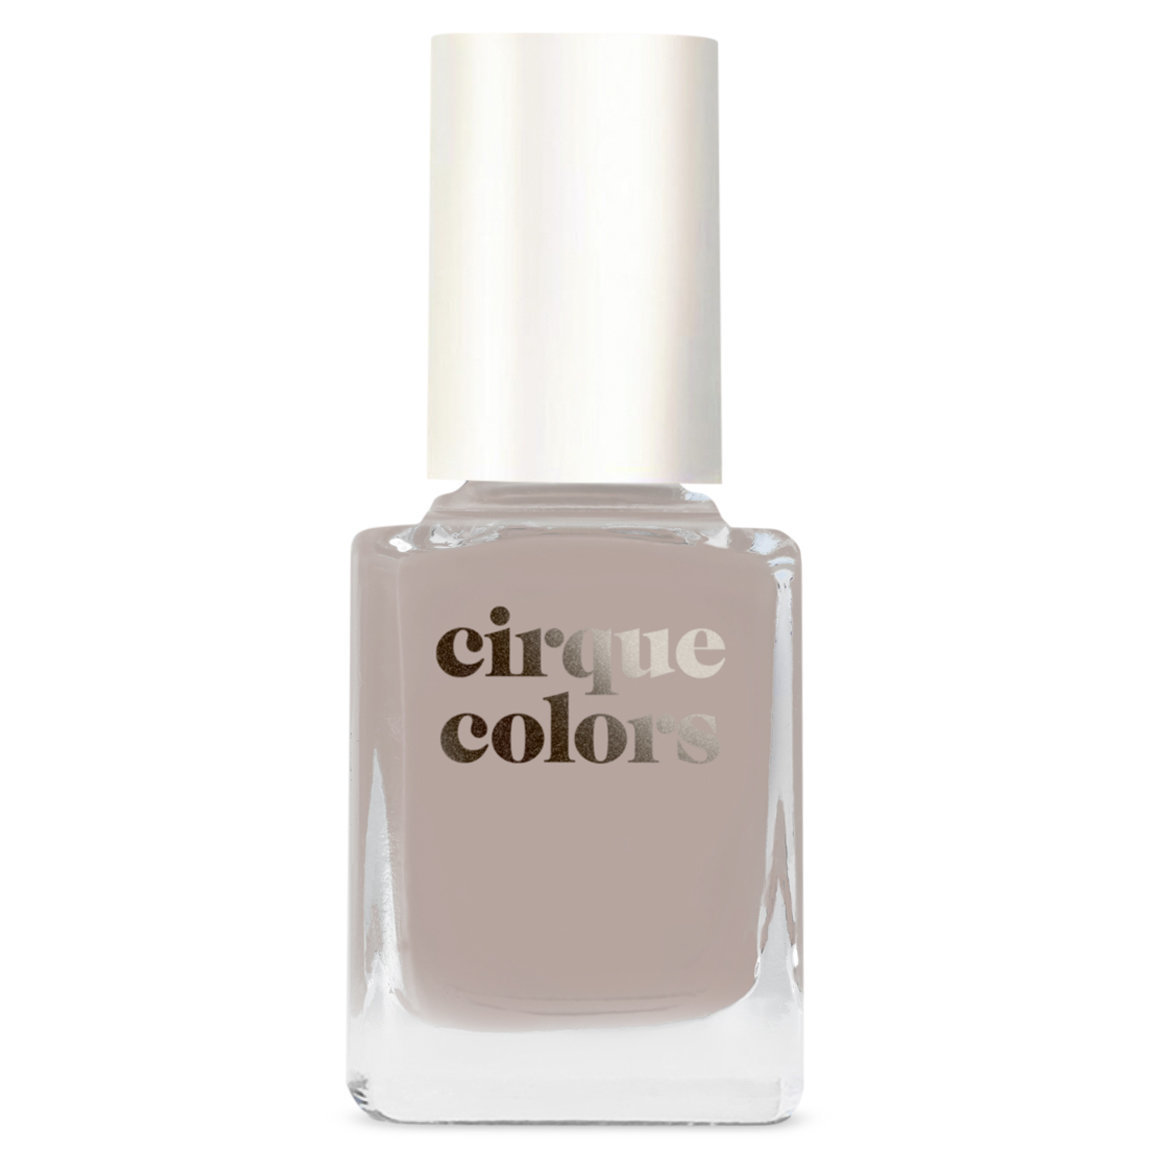 Cirque Colors Jelly Nail Polish Dove Jelly alternative view 1 - product swatch.